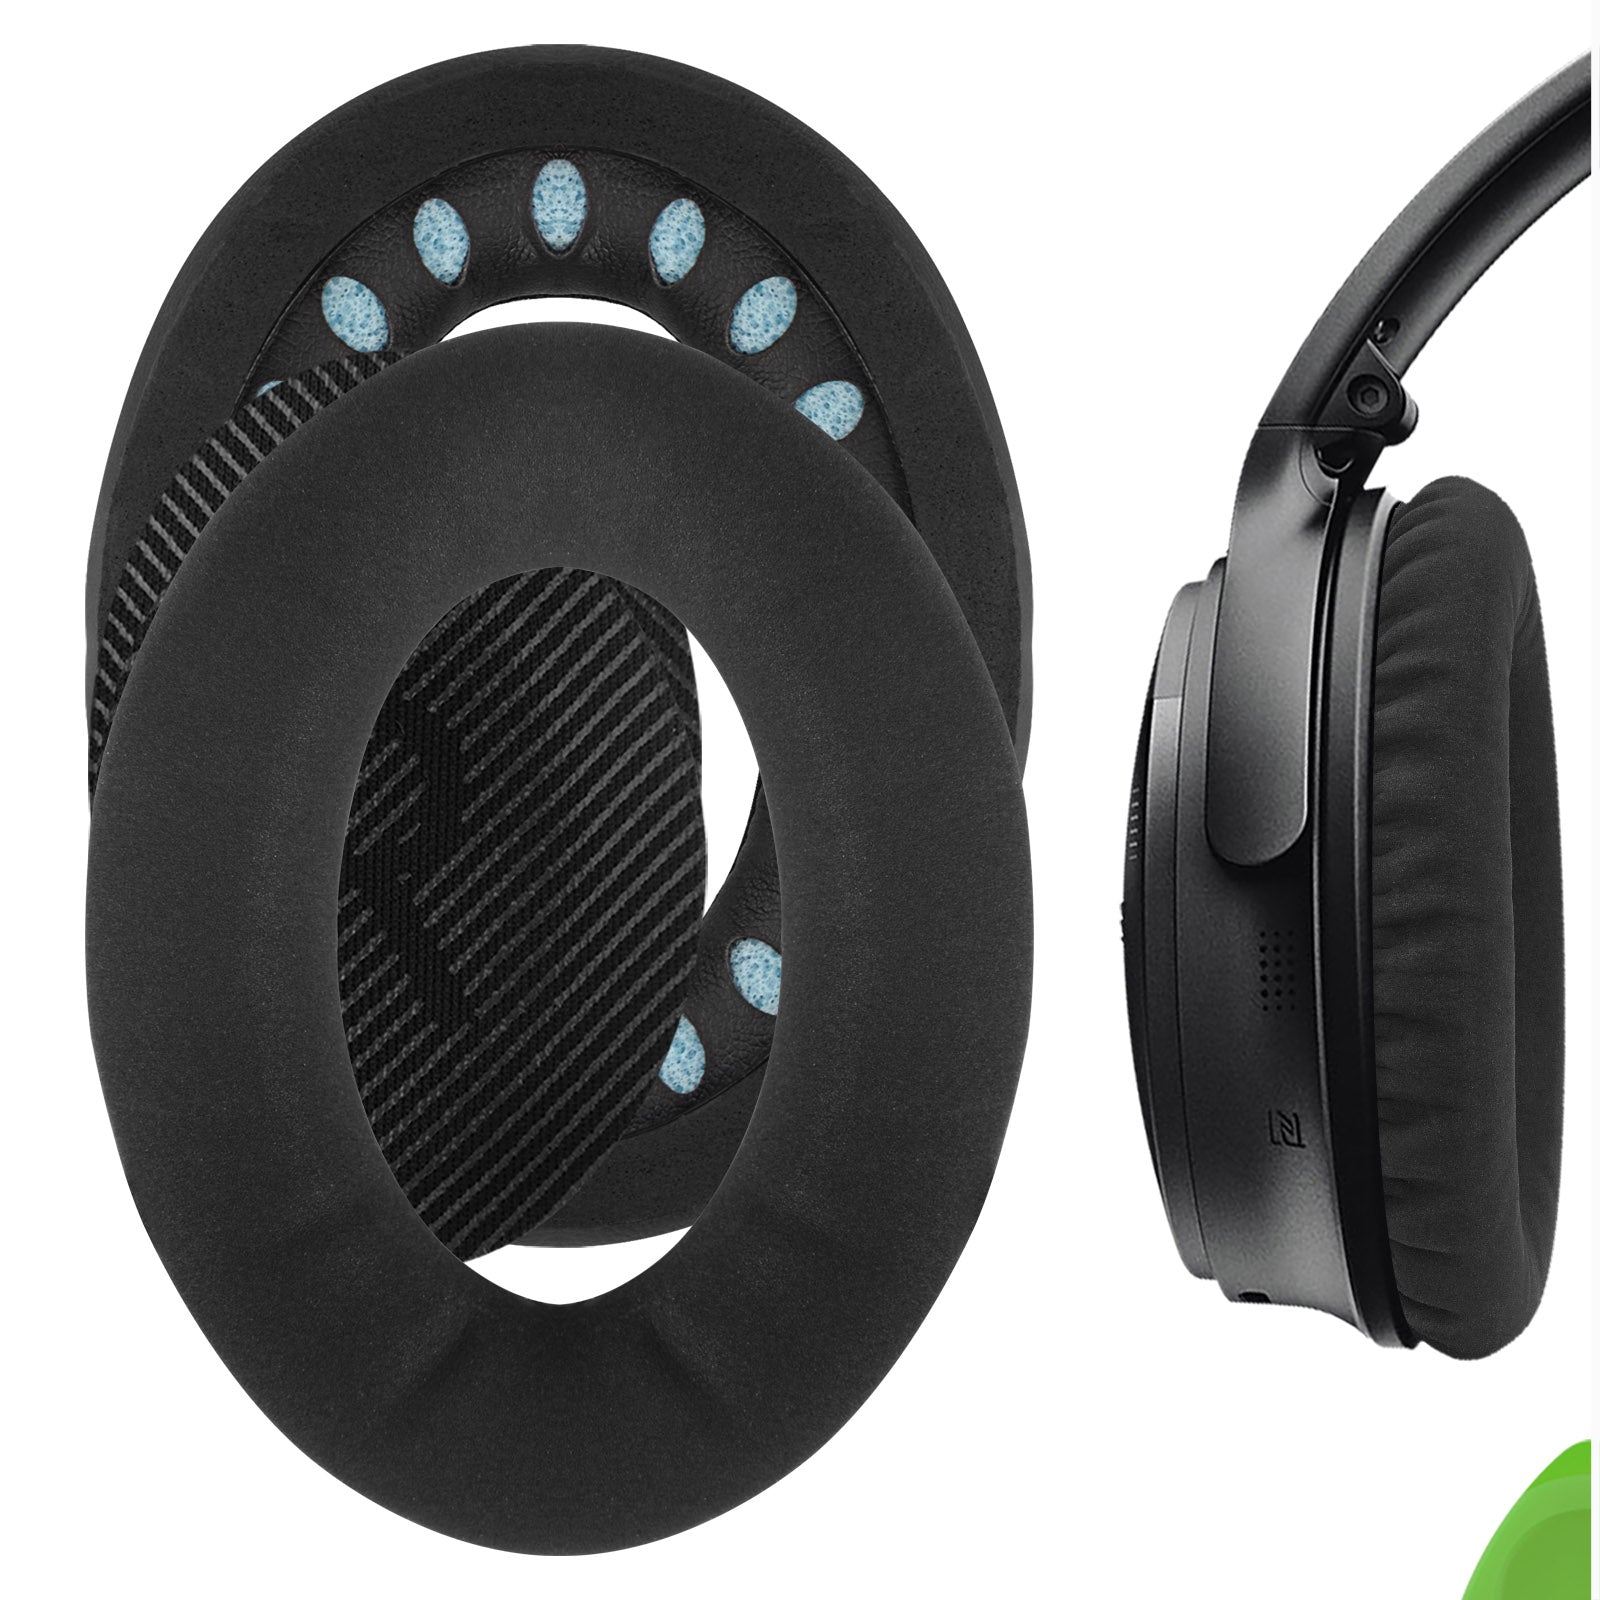 Geekria Sport Cooling Gel Replacement Ear Pads for Bose QC45, QC35, QC35  ii, QC35 ii Gaming, QC15 QC25, AE2, AE2i, AE2w, SoundTrue, SoundLink AE